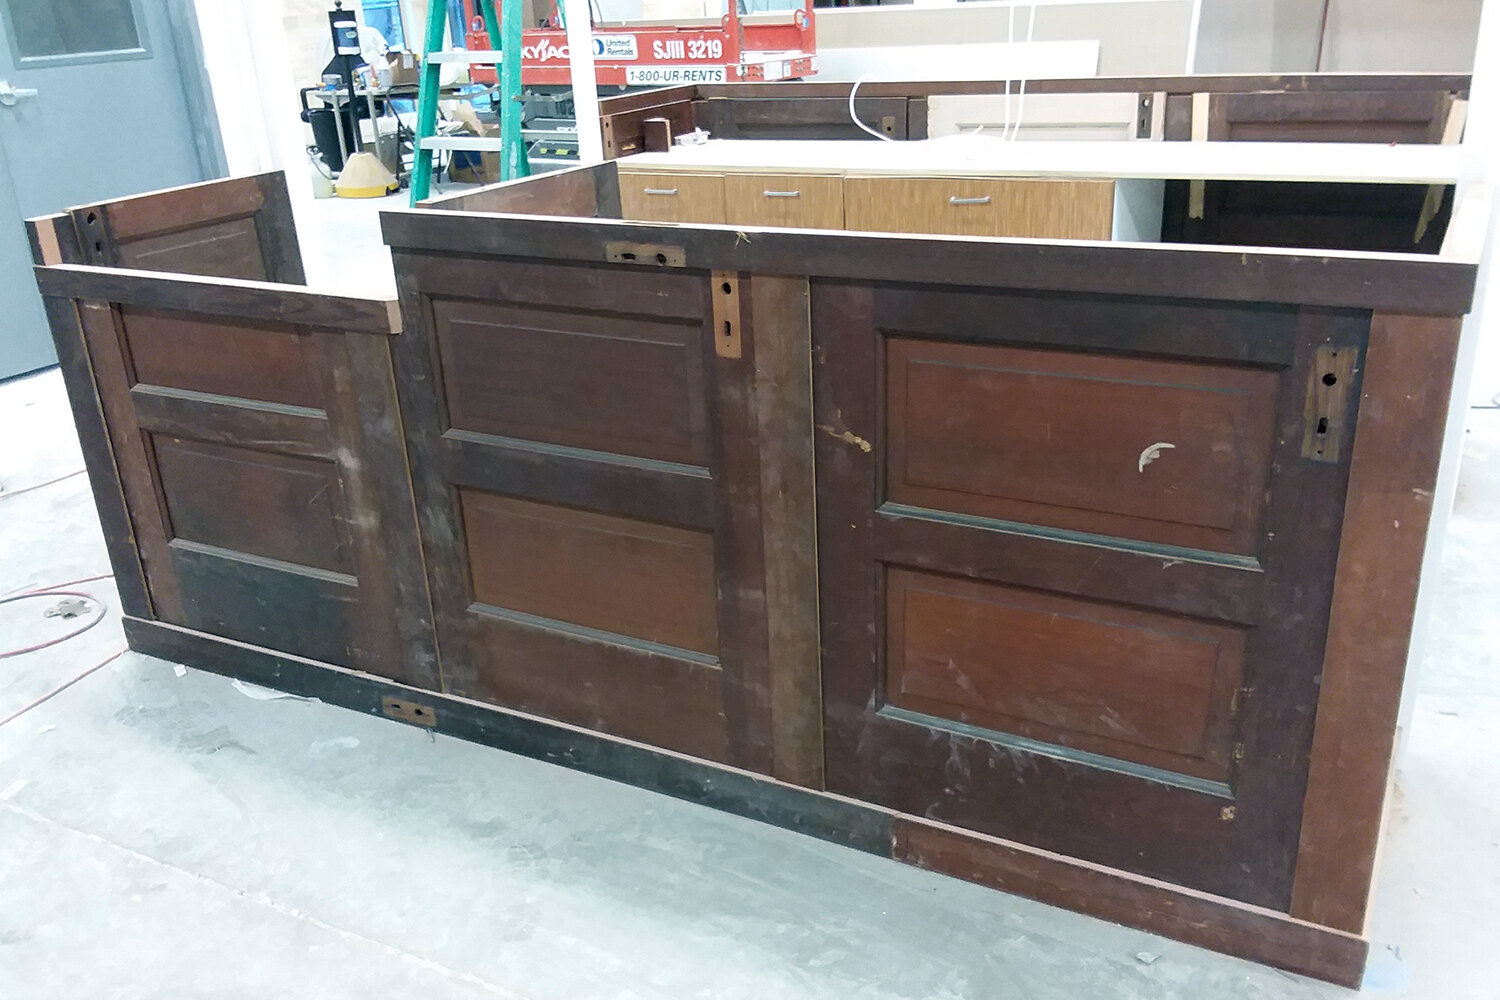 The new checkout station features vintage doors and donated cabinets